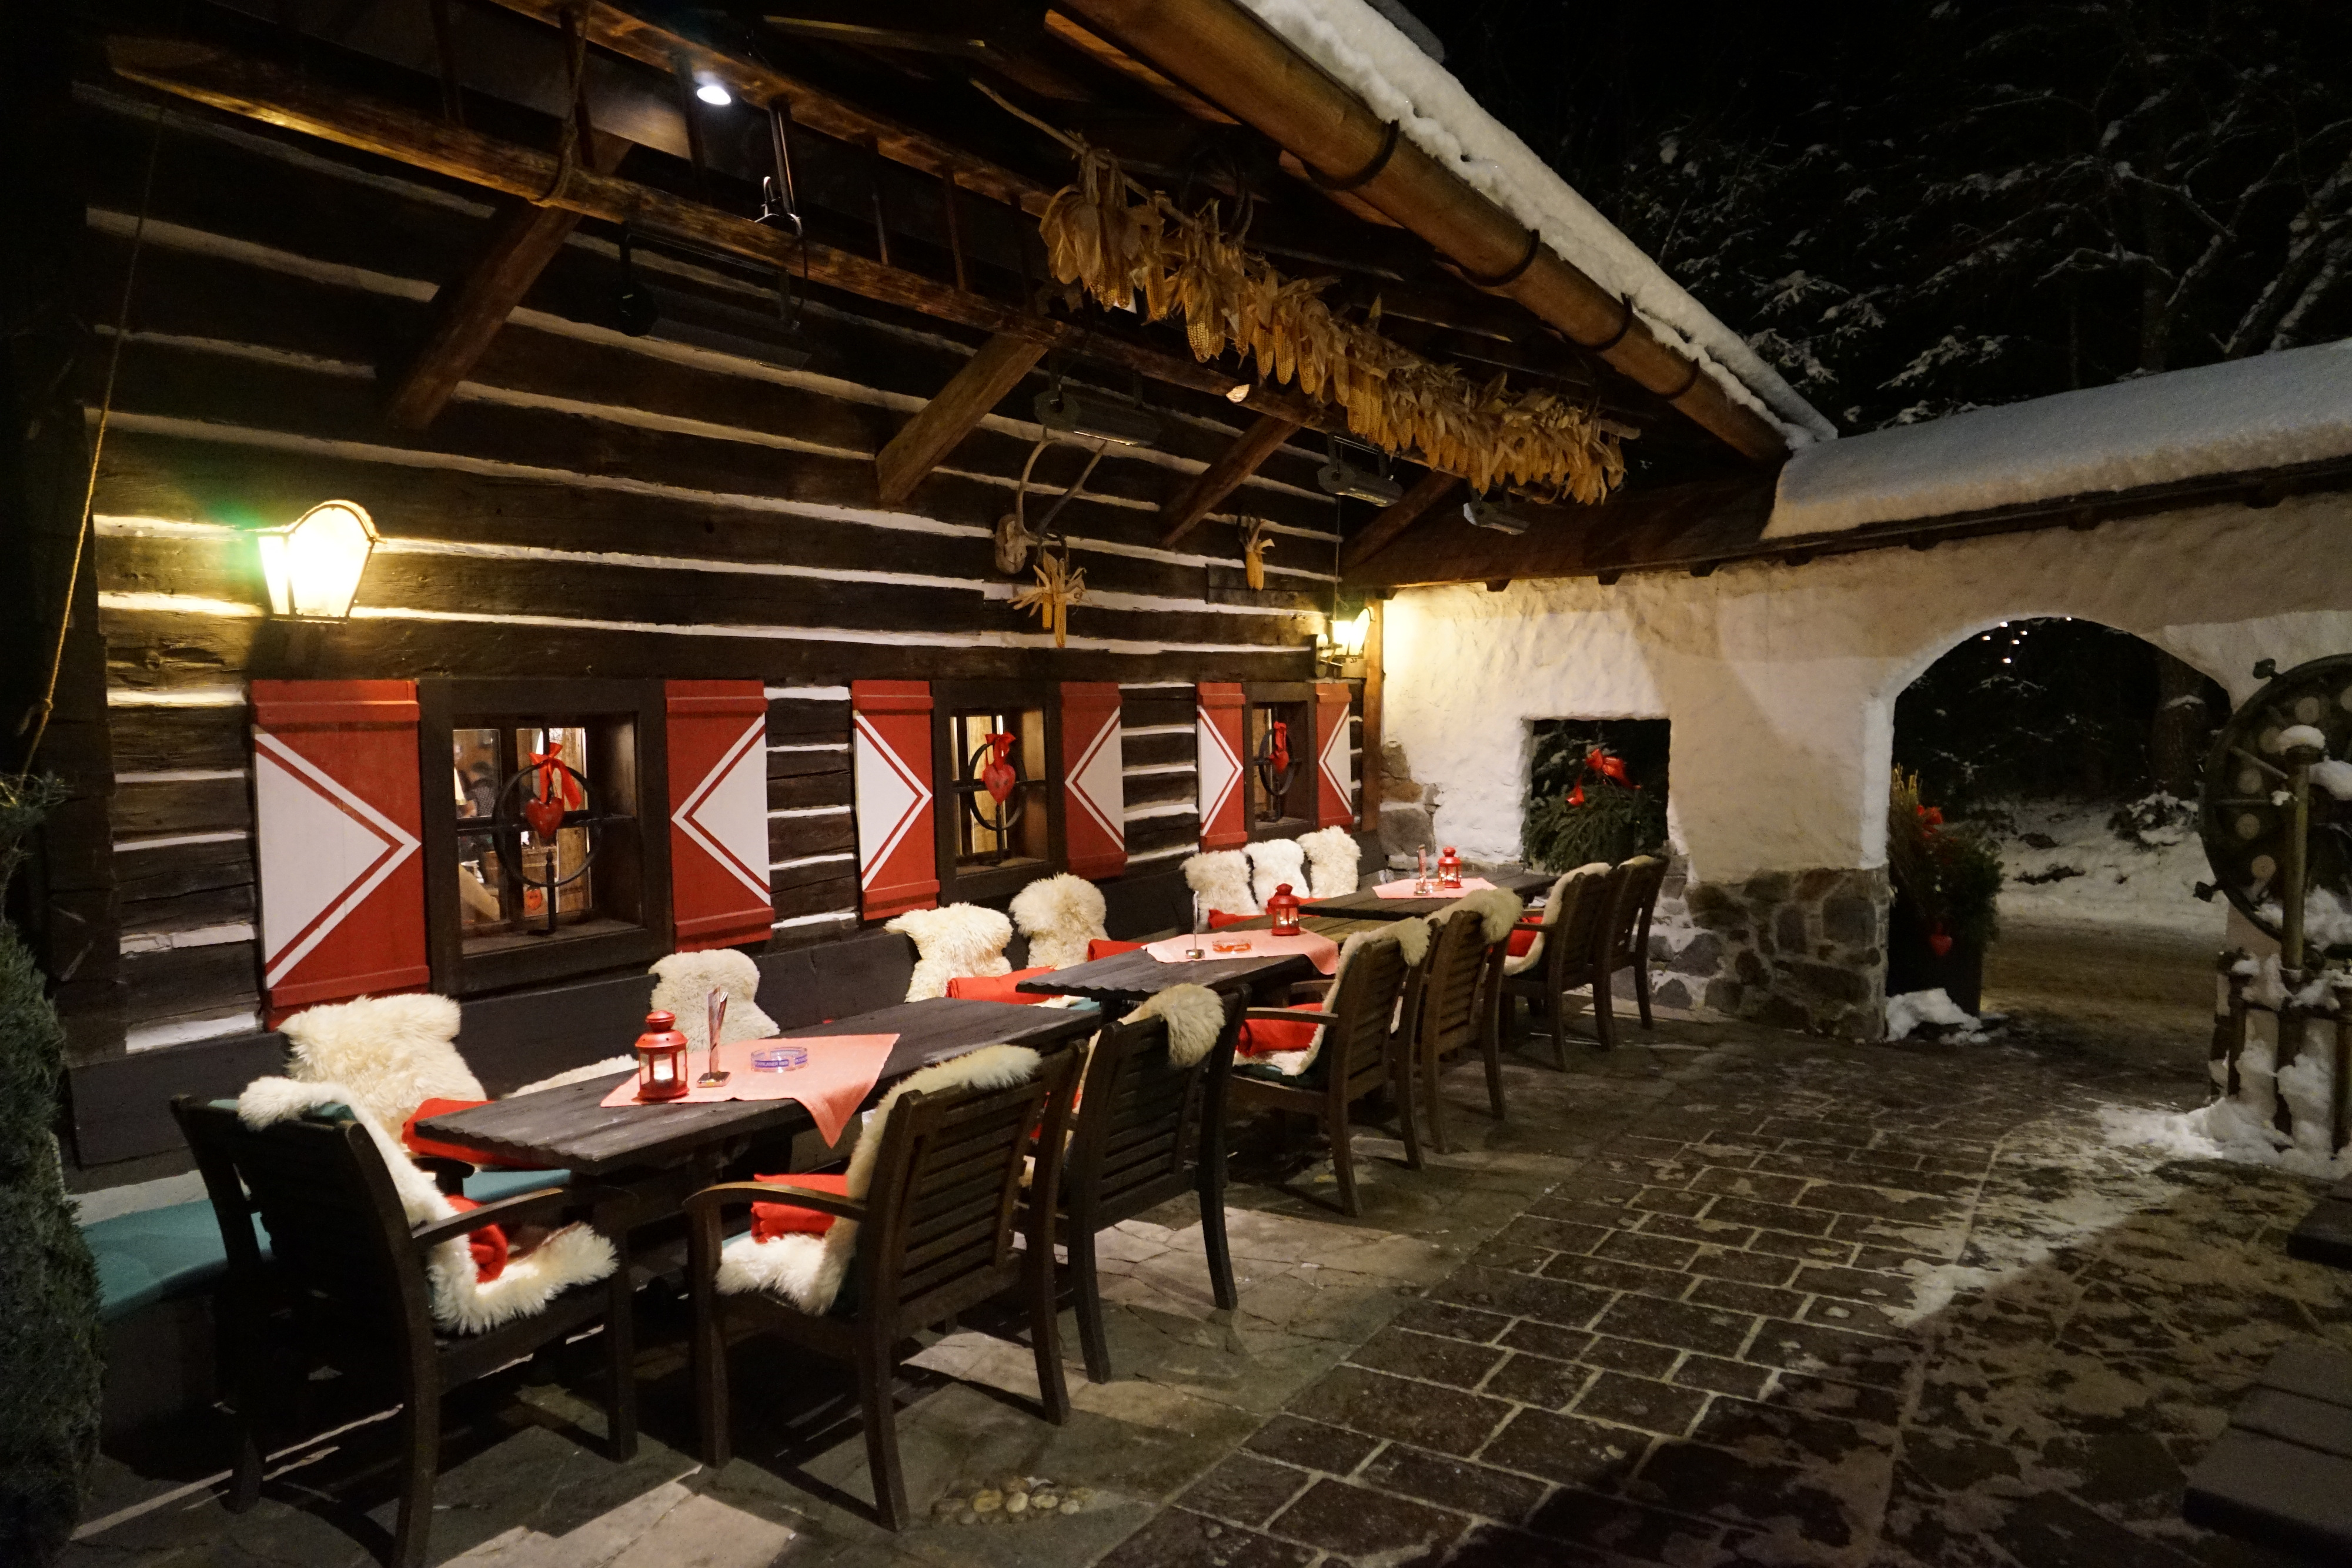 Outer dining area in the winter of the einkehr